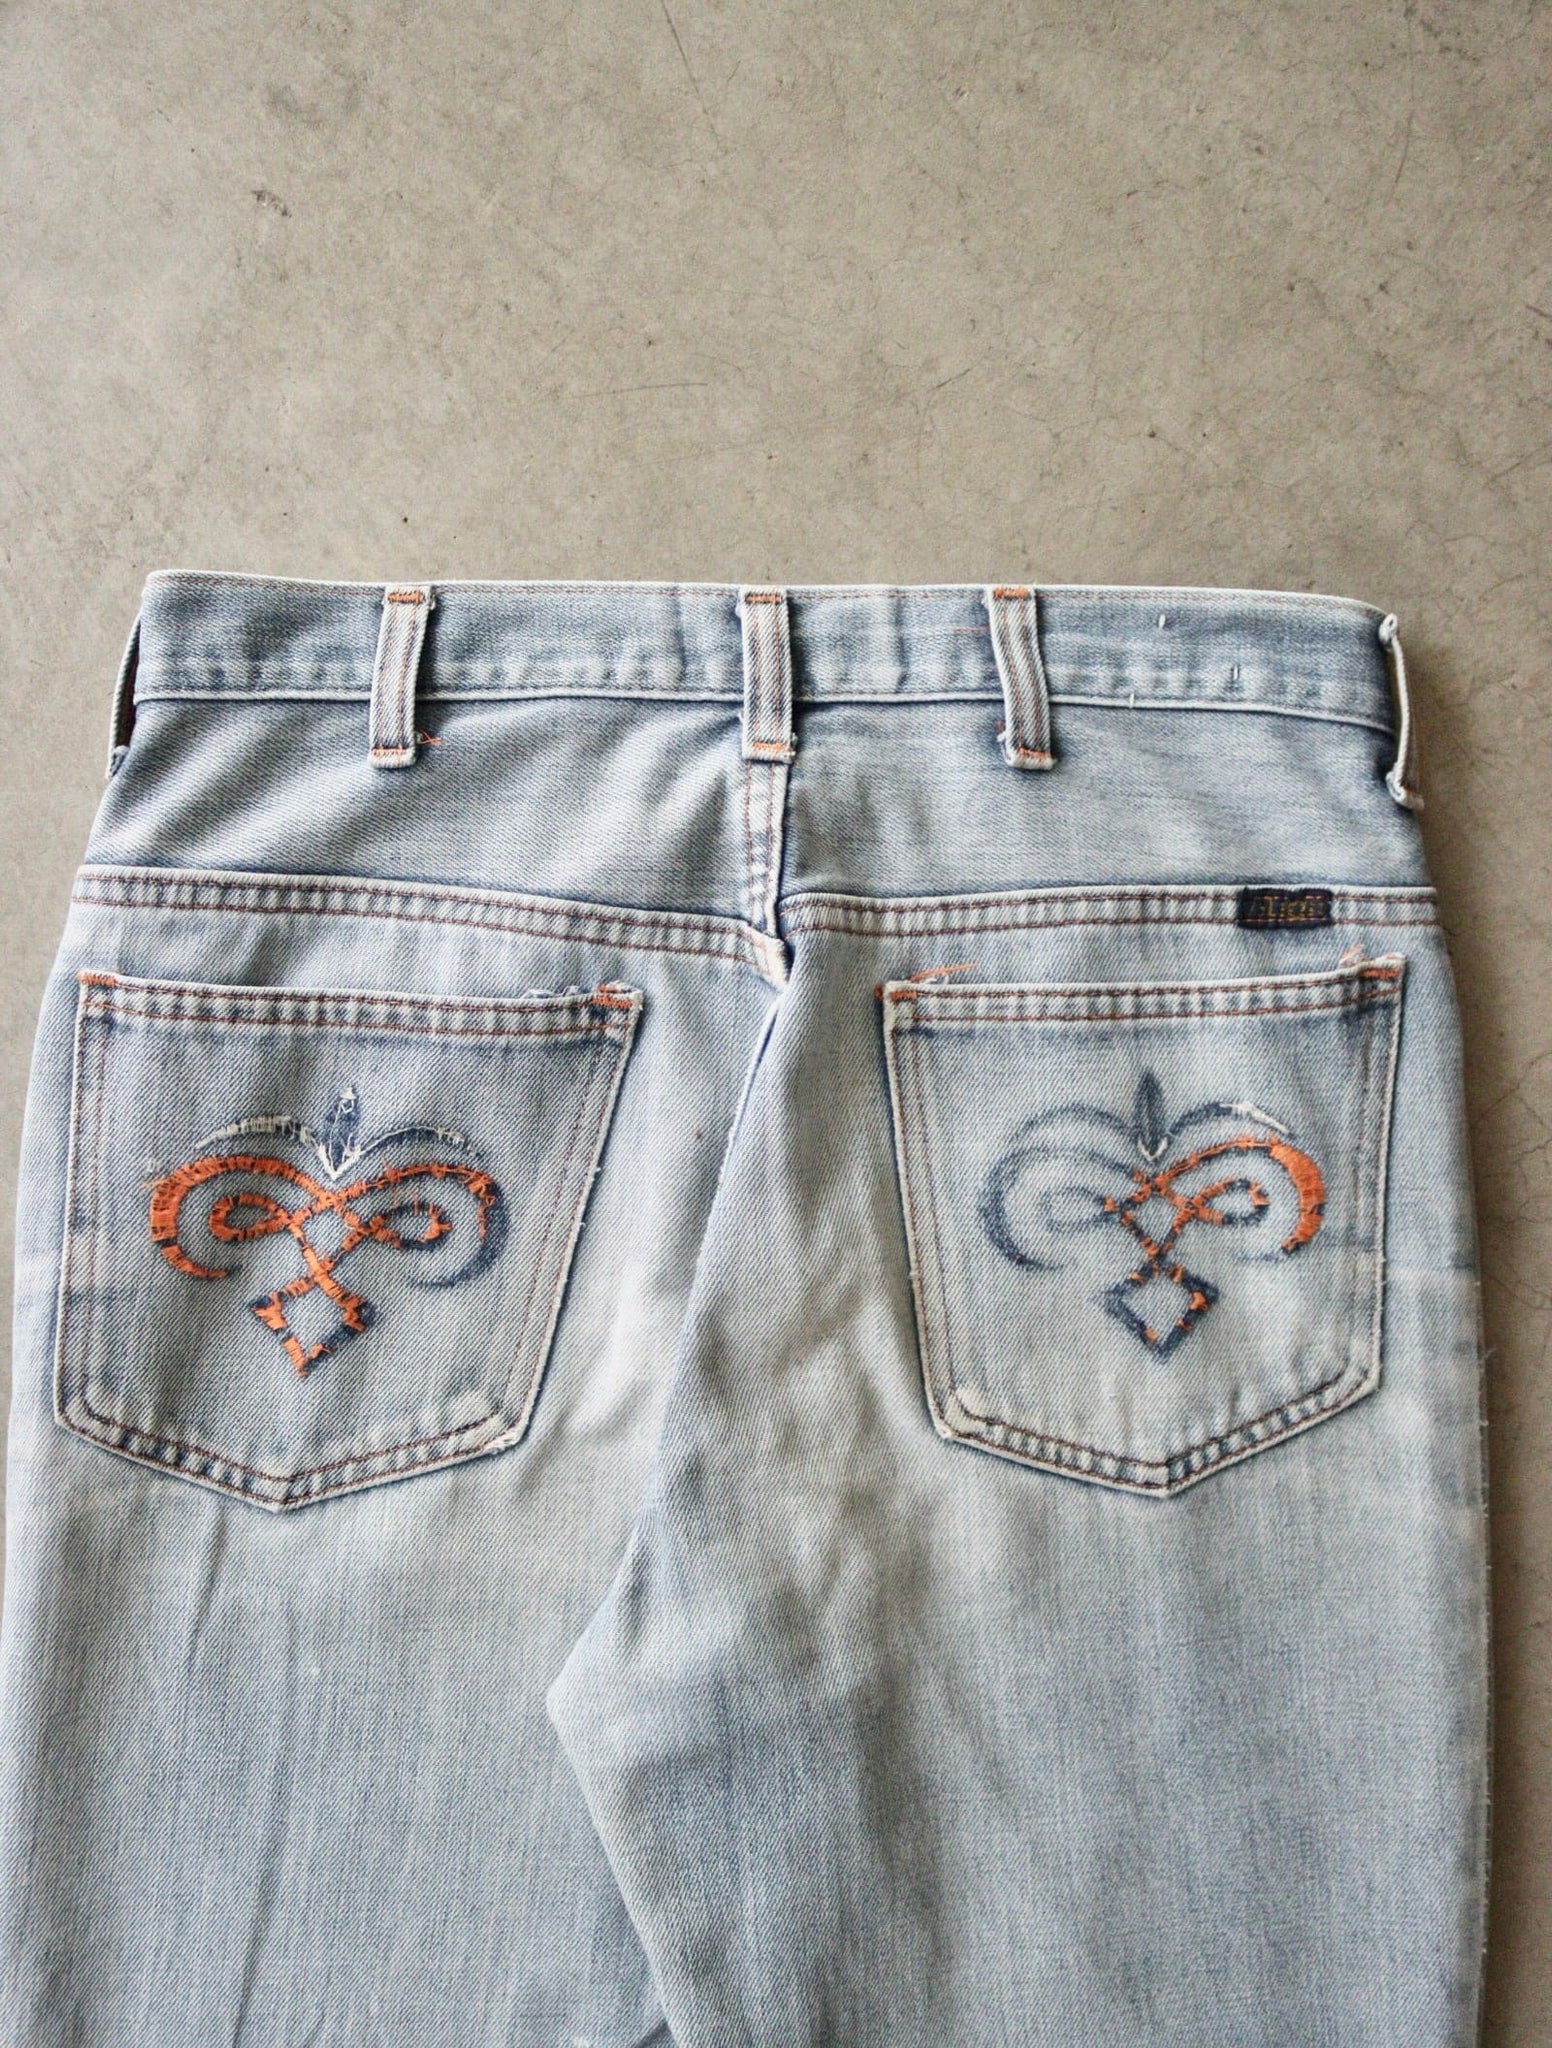 1970S DOUBLE KNEE PATCHED FLARED DENIM PANTS